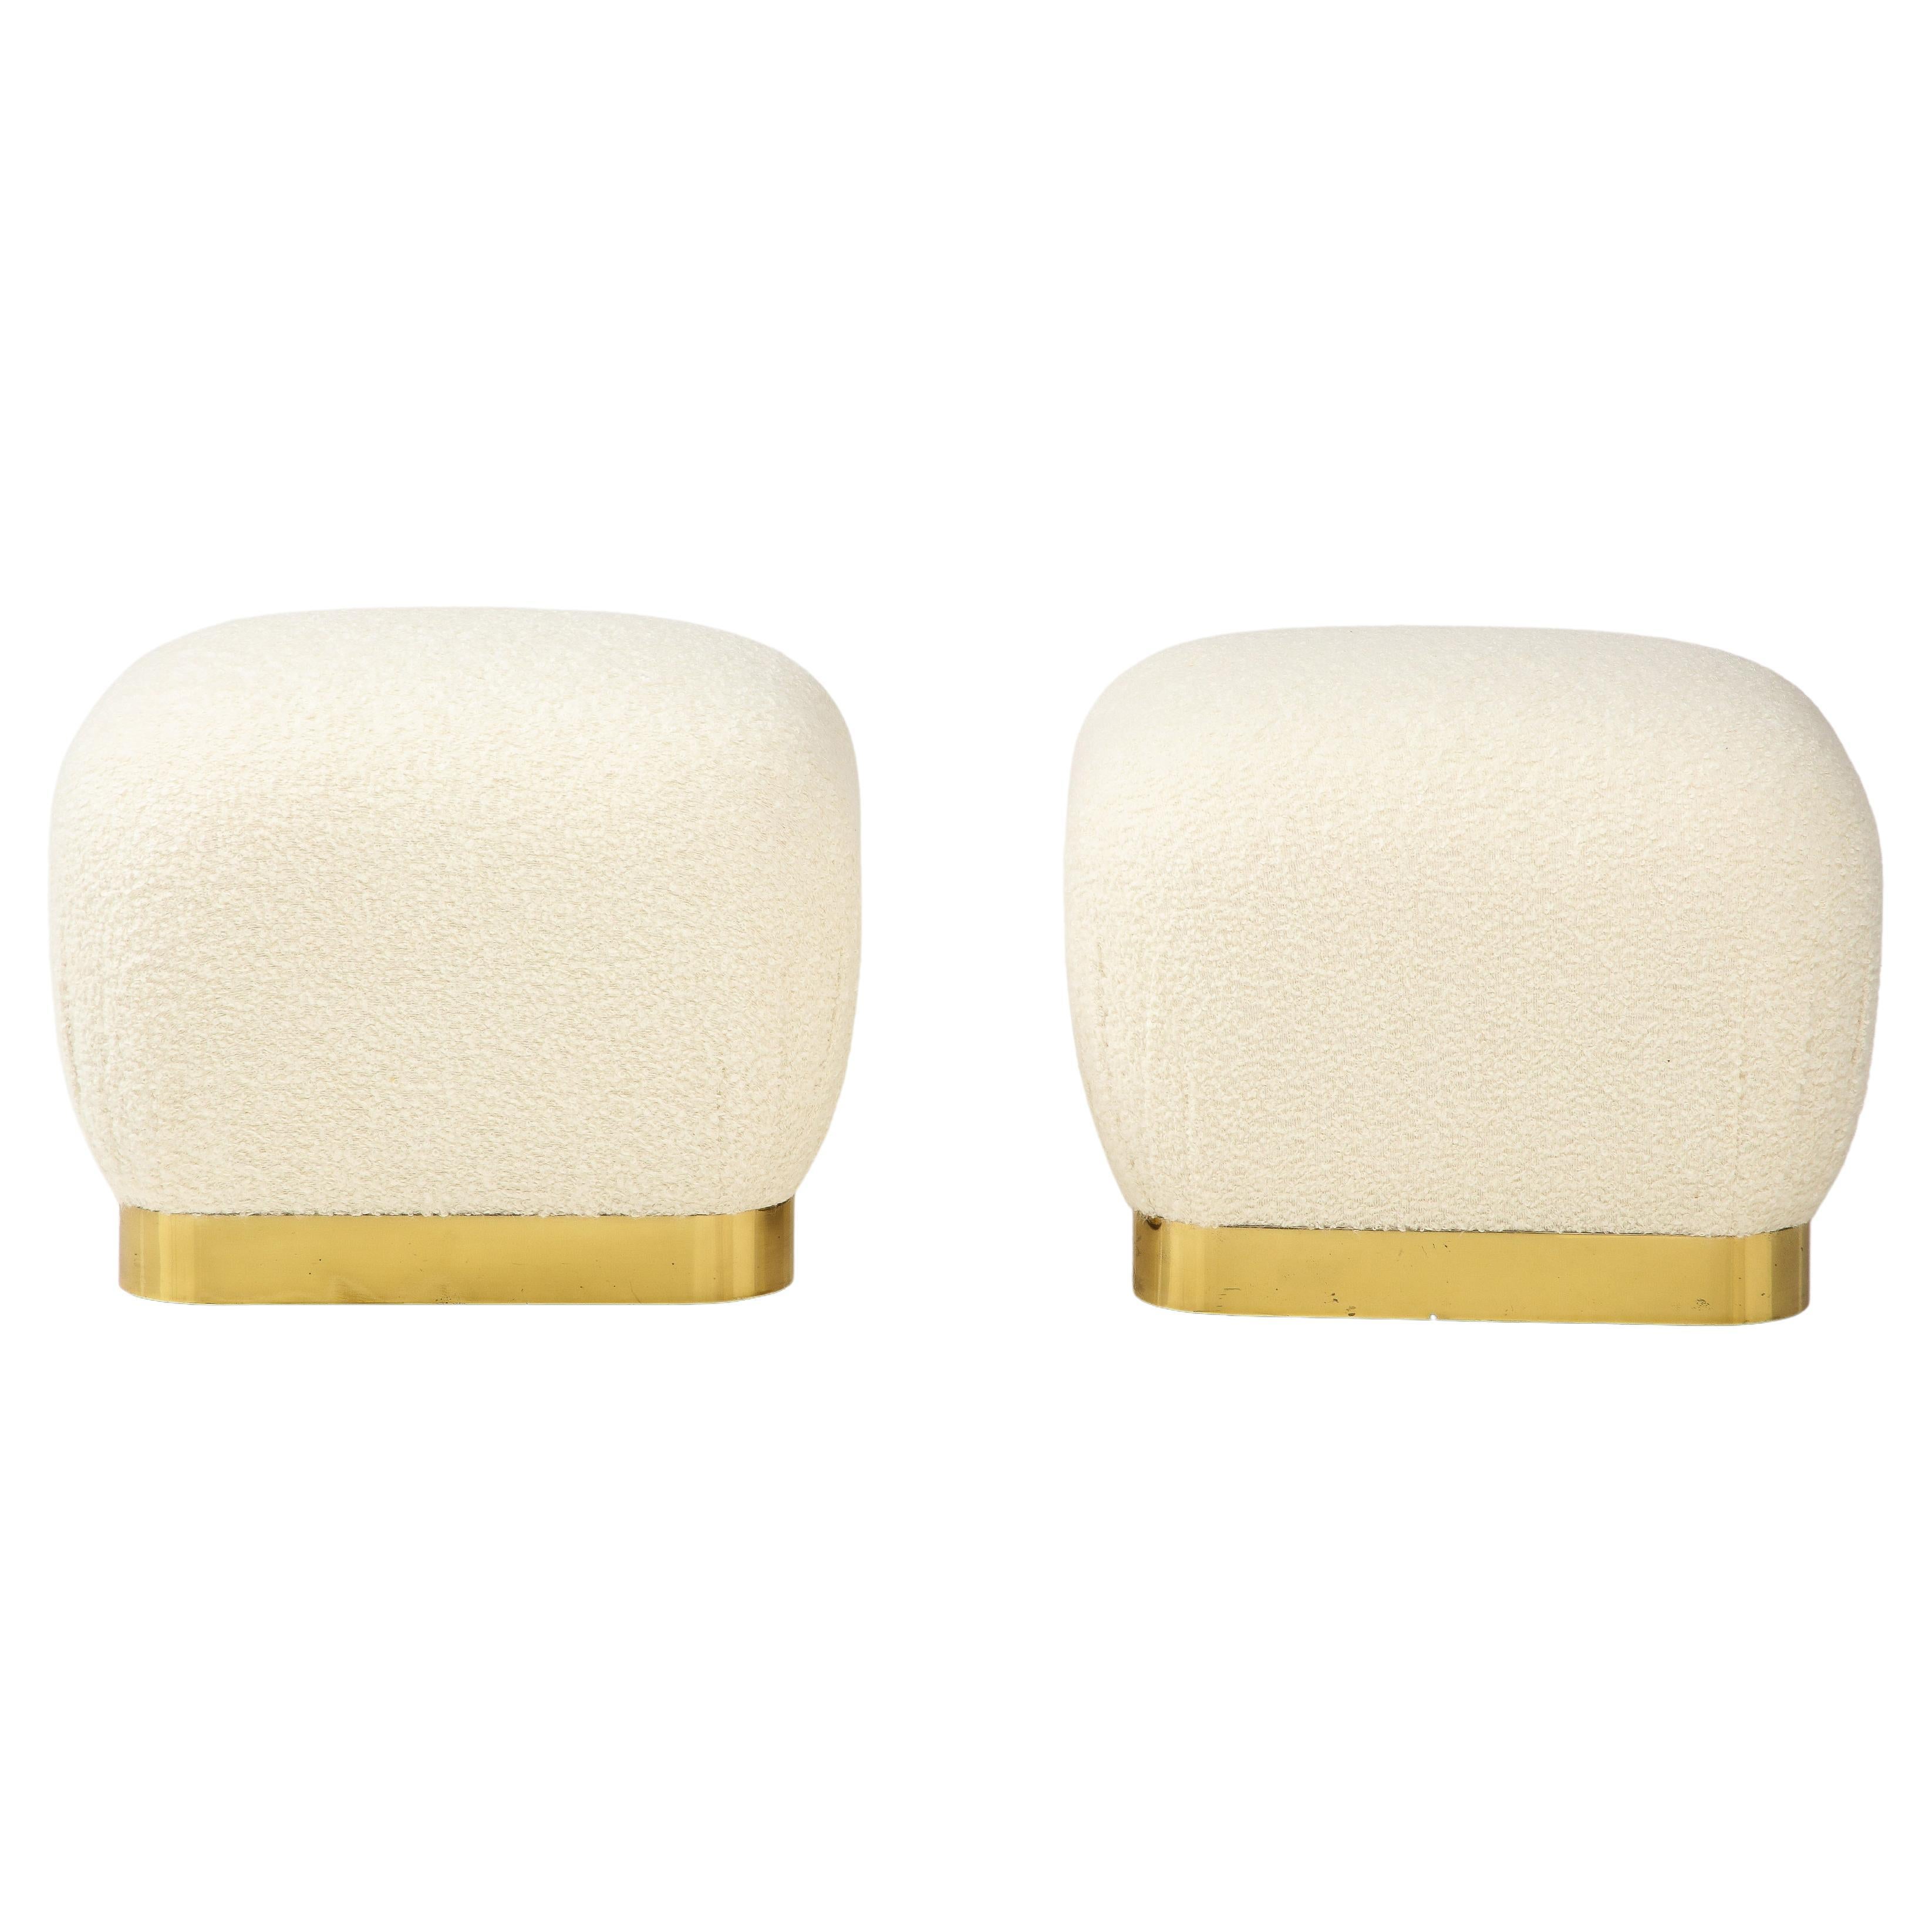 American Karl Springer Pair of Souffle Ottomans in Ivory Bouclé and Brass, 1980s For Sale